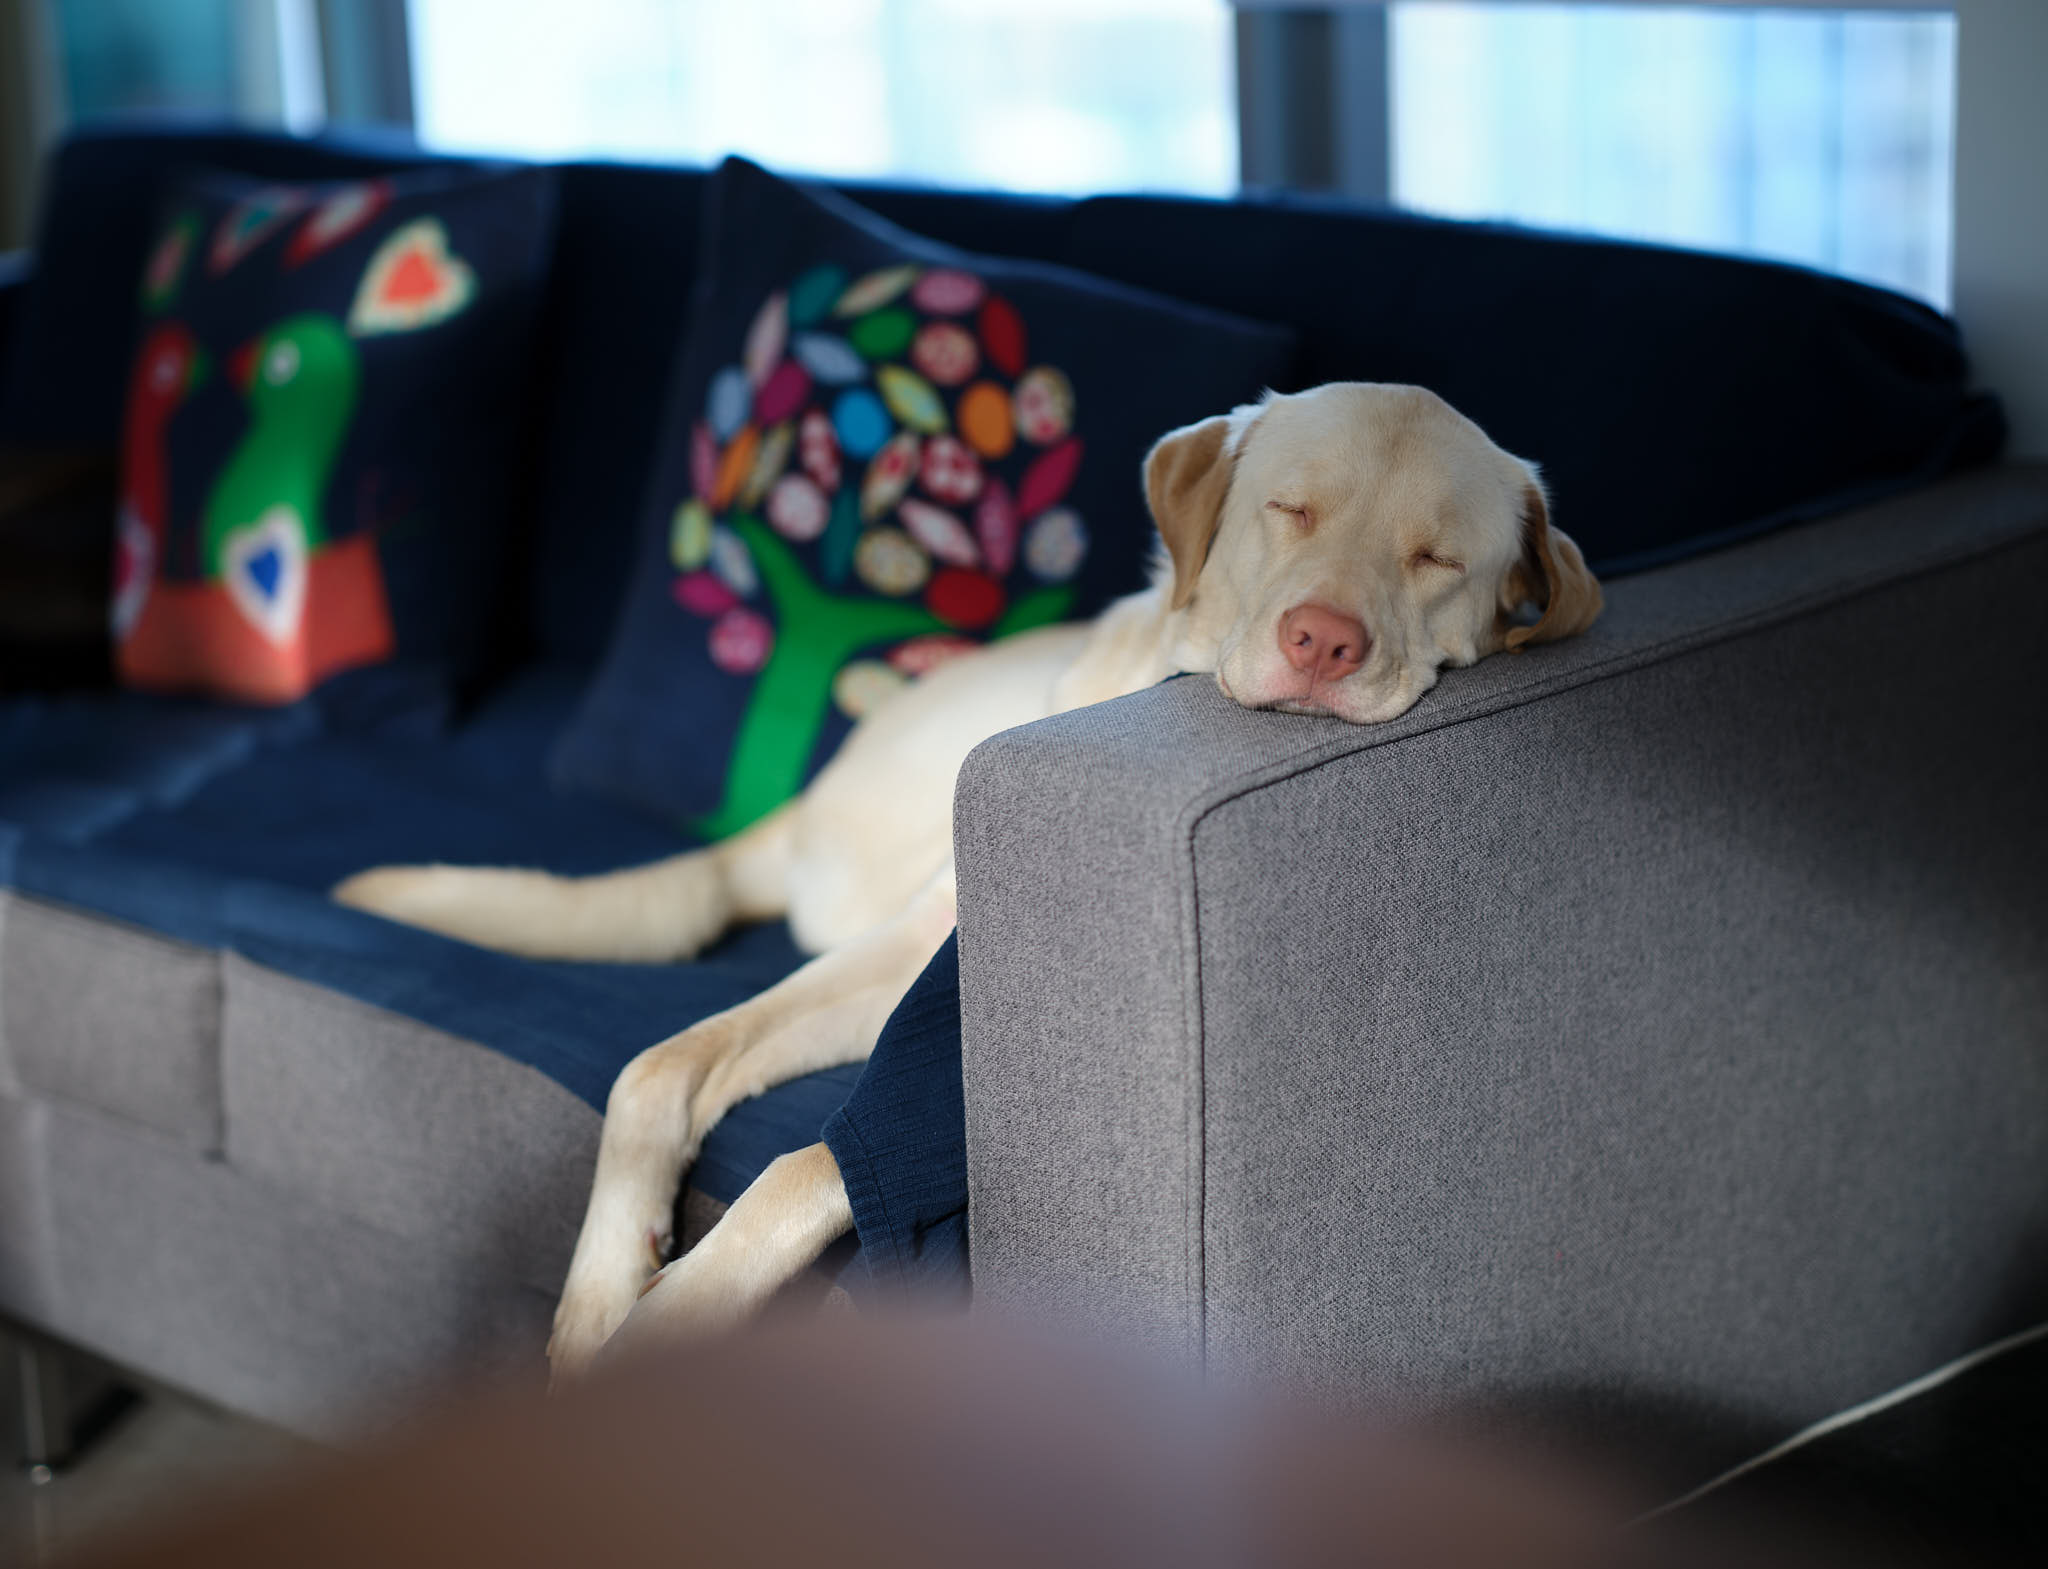 Cute white Hong Kong rescue puppy sleeping on sofa armrest